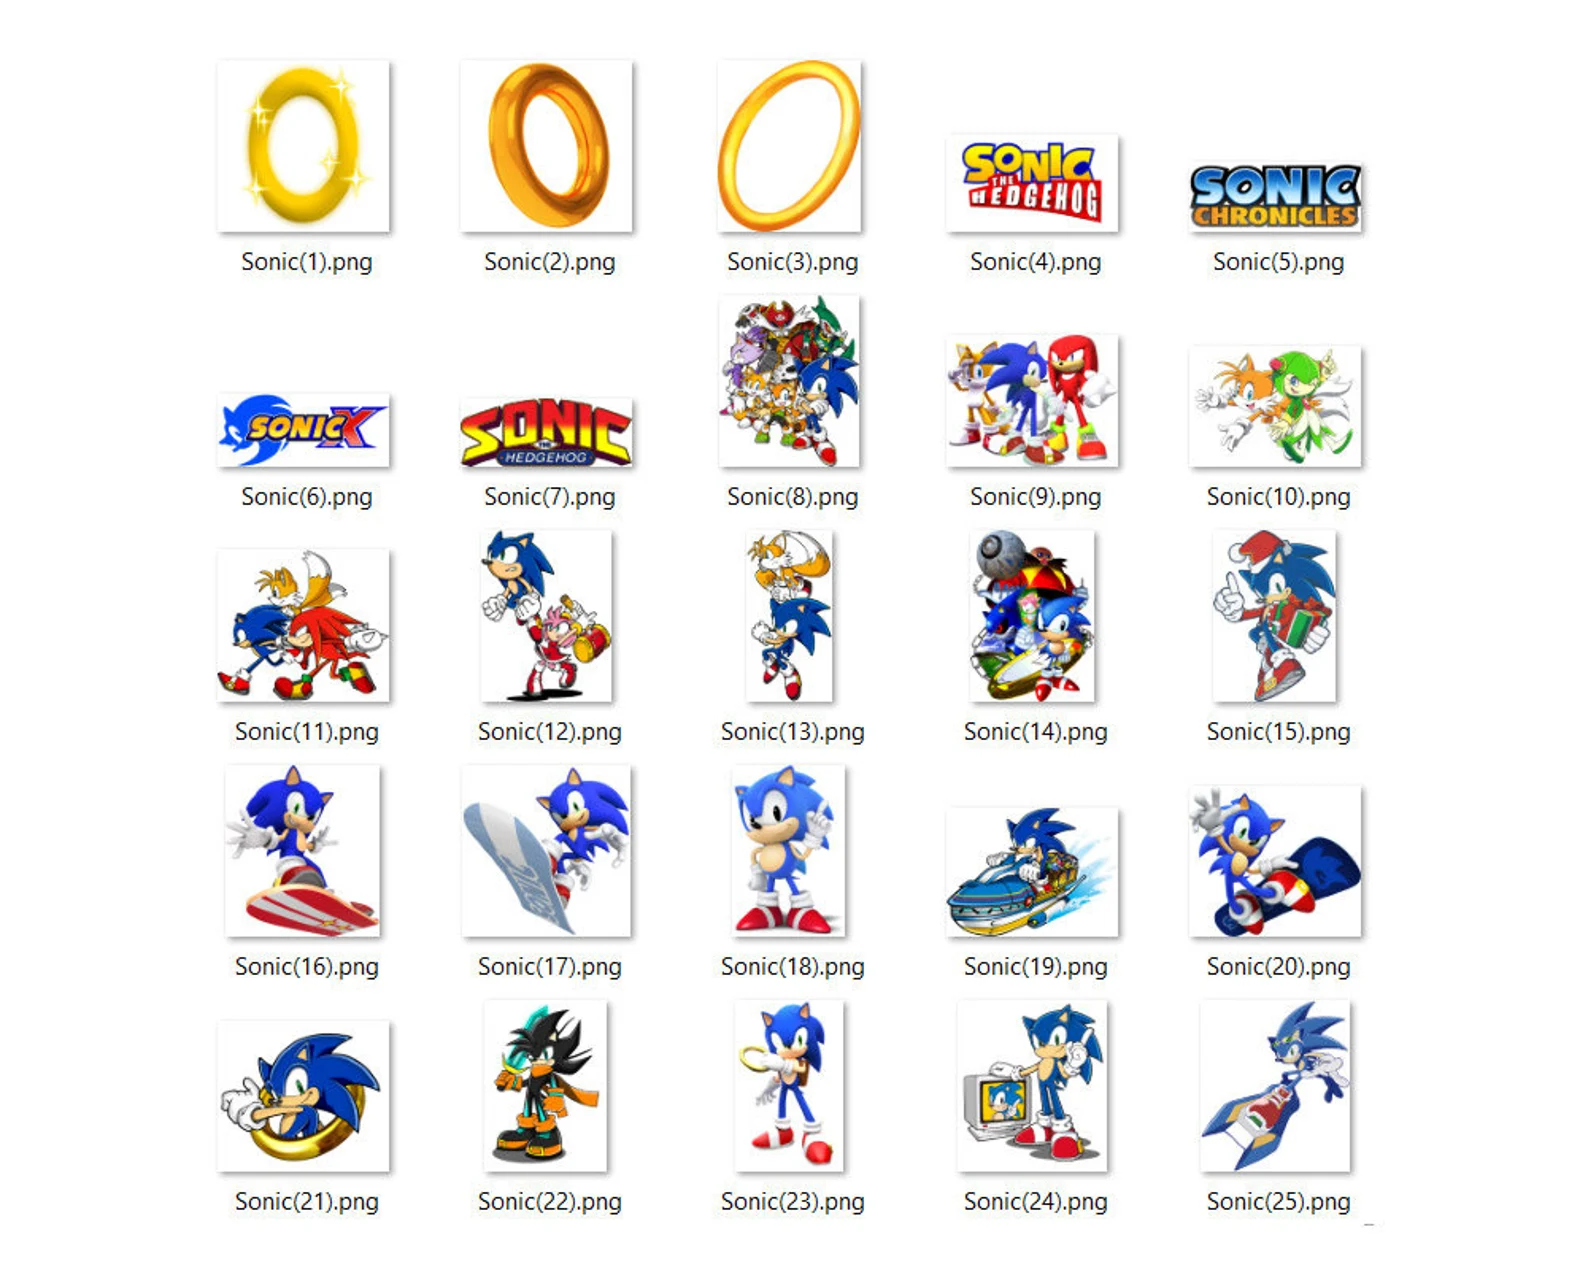 Diverse of sonic illustrations.